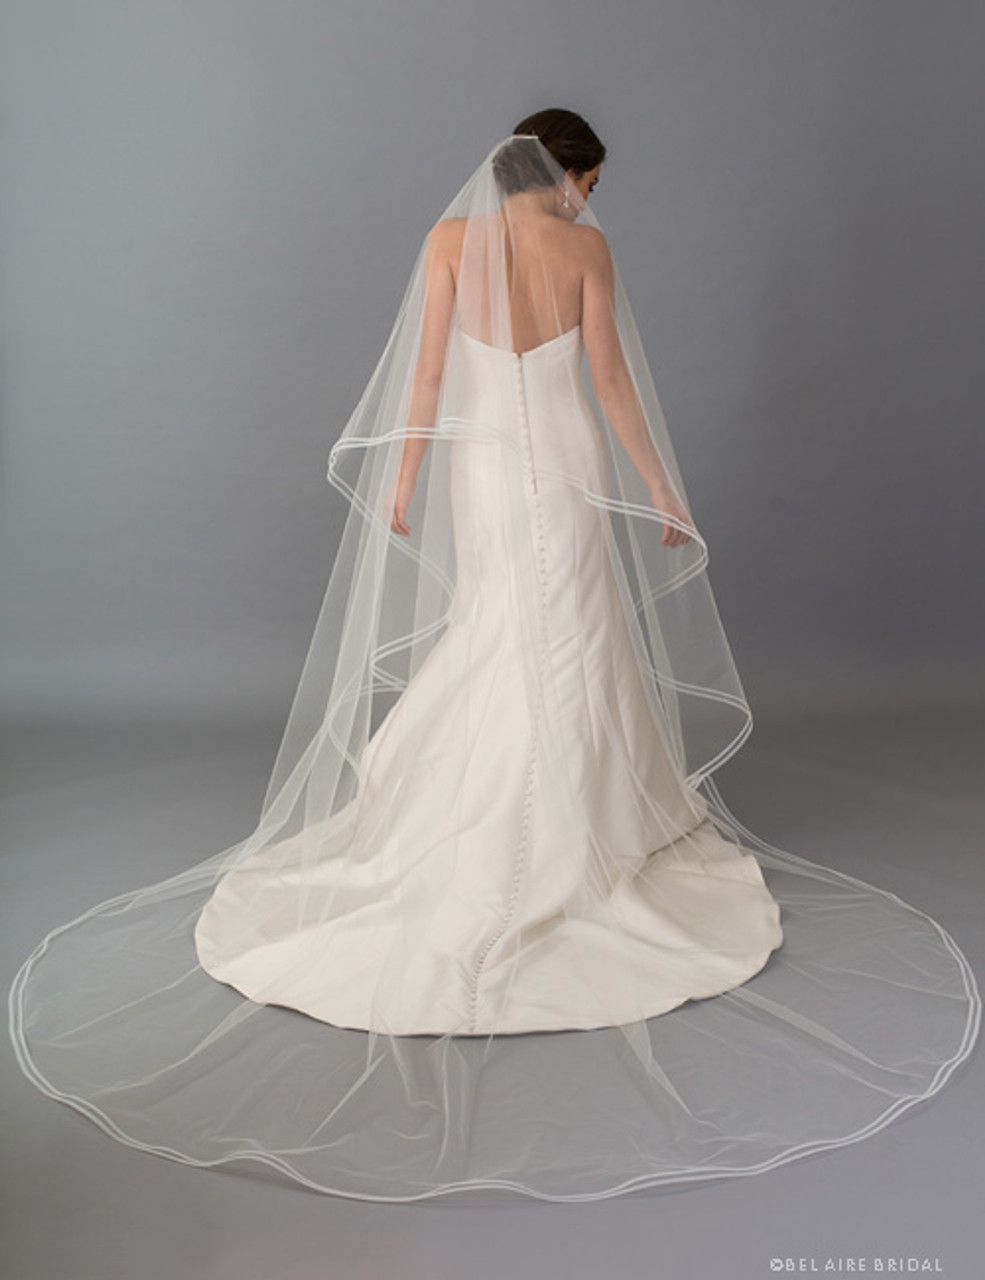 Bel Aire Bridal Veils V7405C - 2-tier foldover cathedral veil with narrow horsehair.